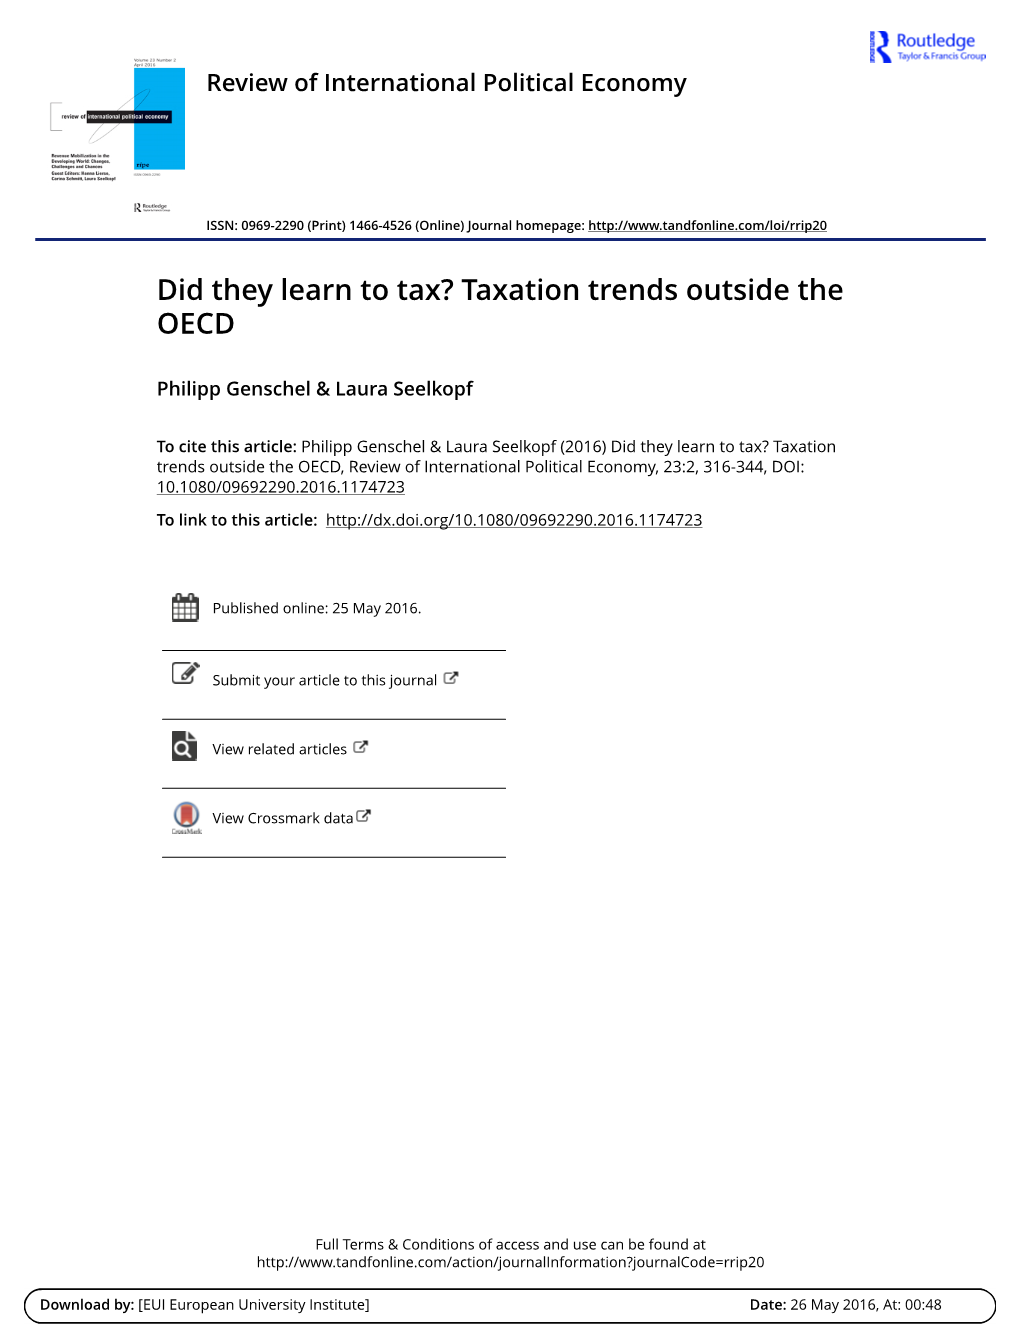 Did They Learn to Tax? Taxation Trends Outside the OECD